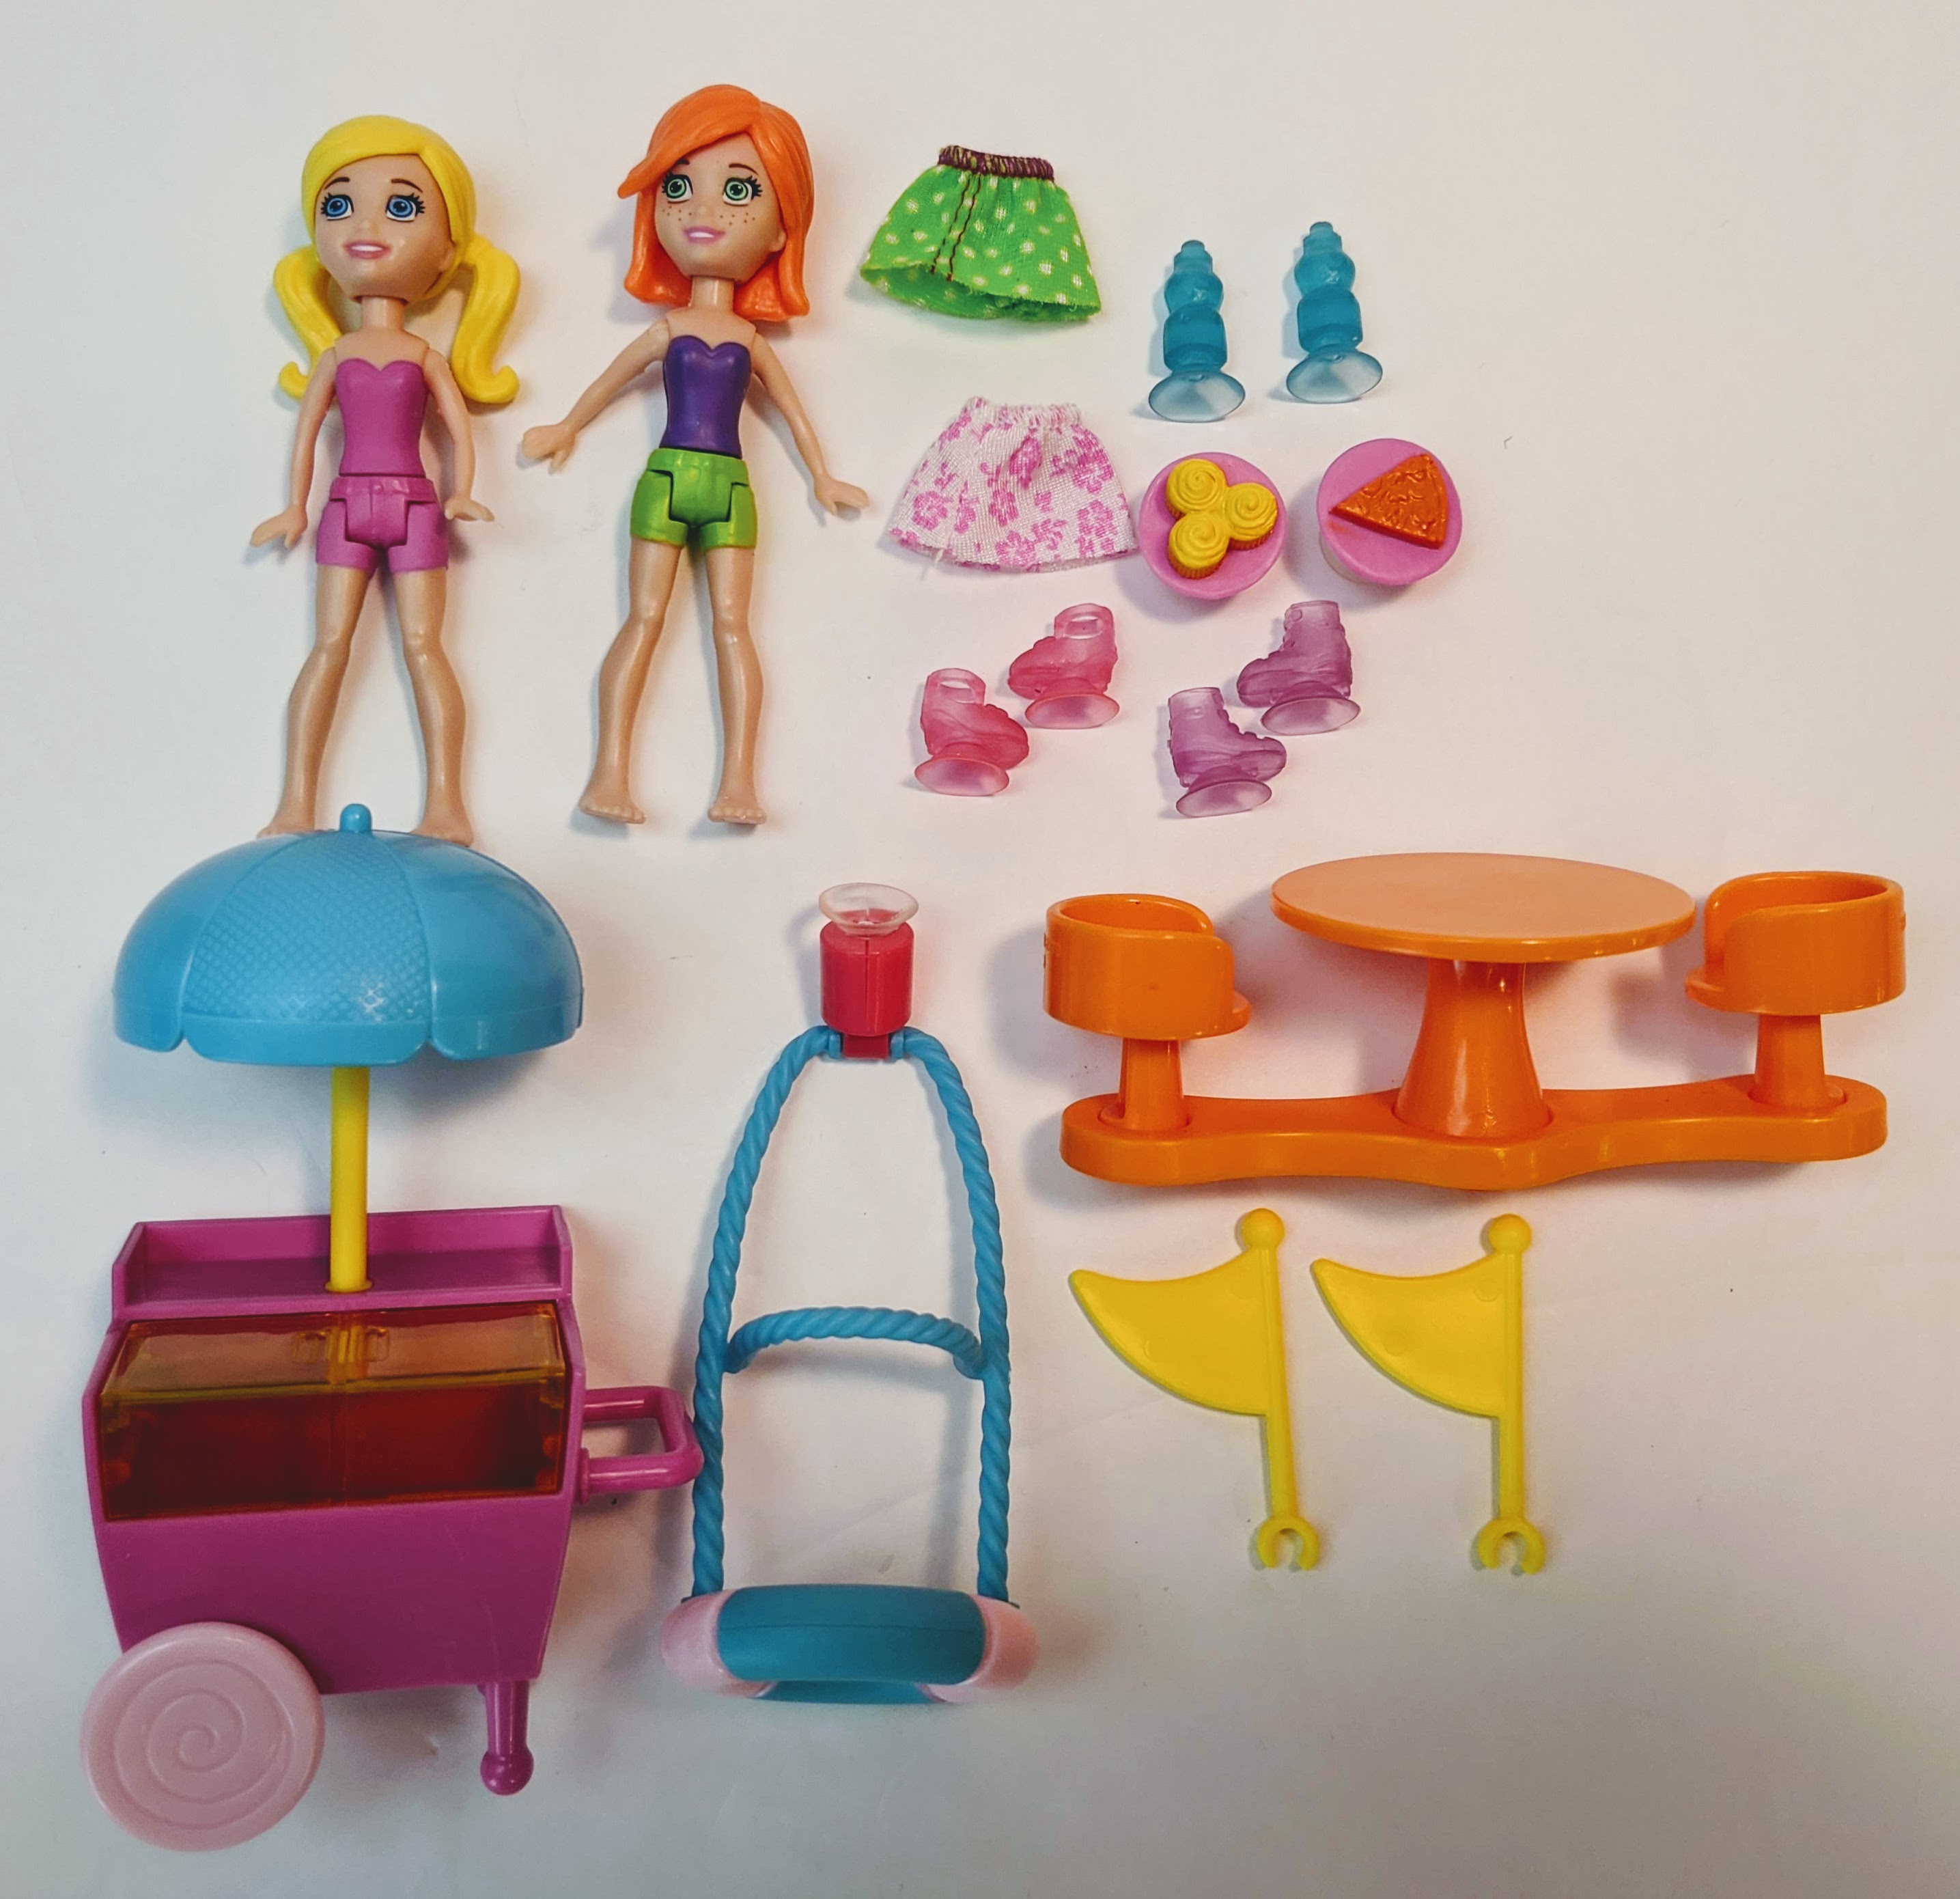 2020 Polly Pocket Index – Fakie Spaceman